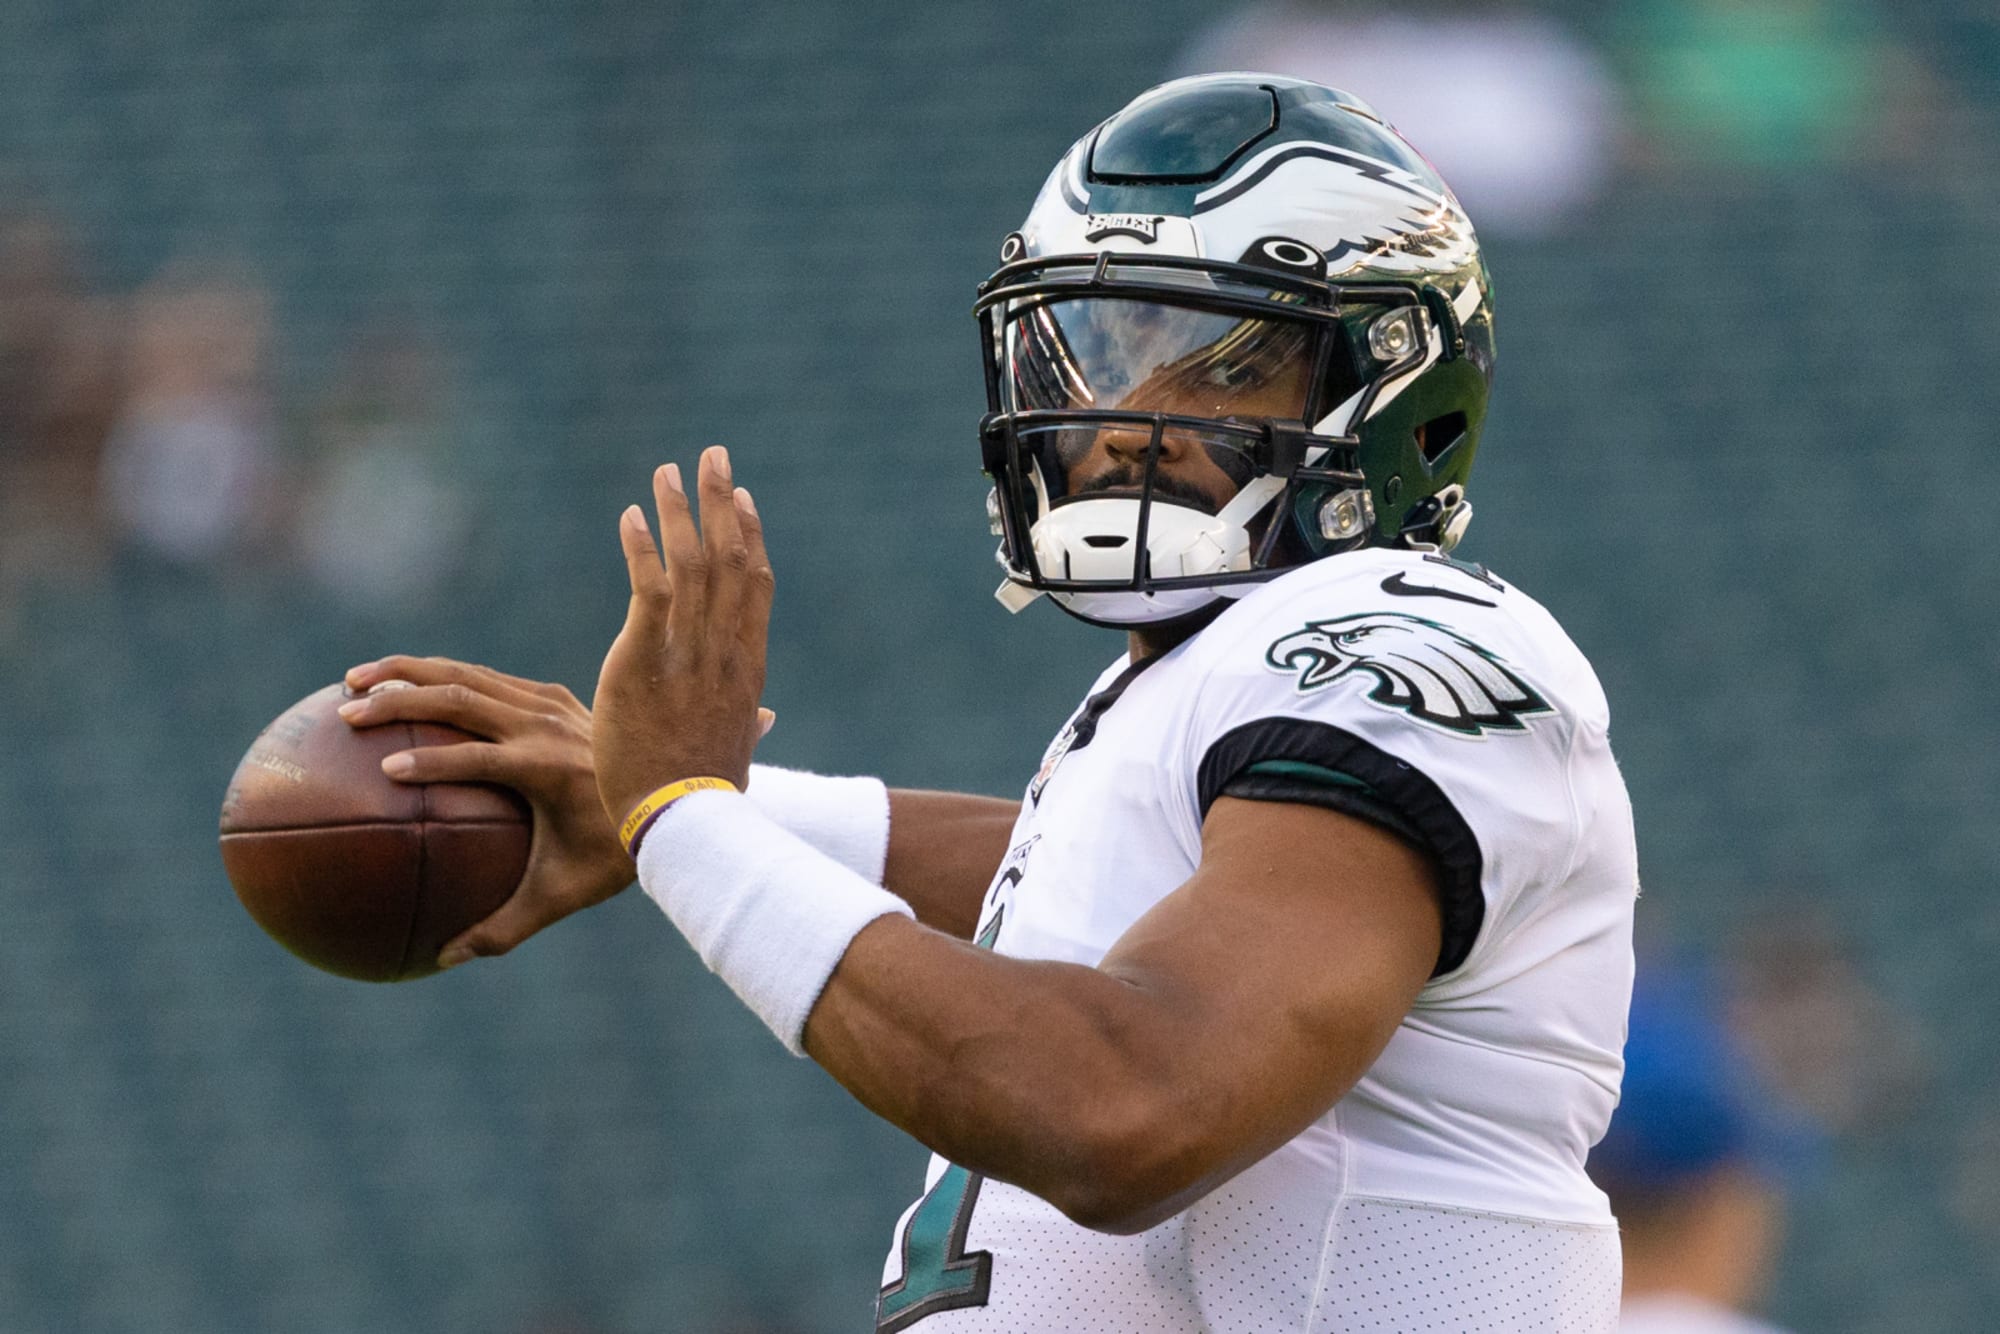 Eagles vs. Patriots: Odds and lines for Week 1 NFL matchup